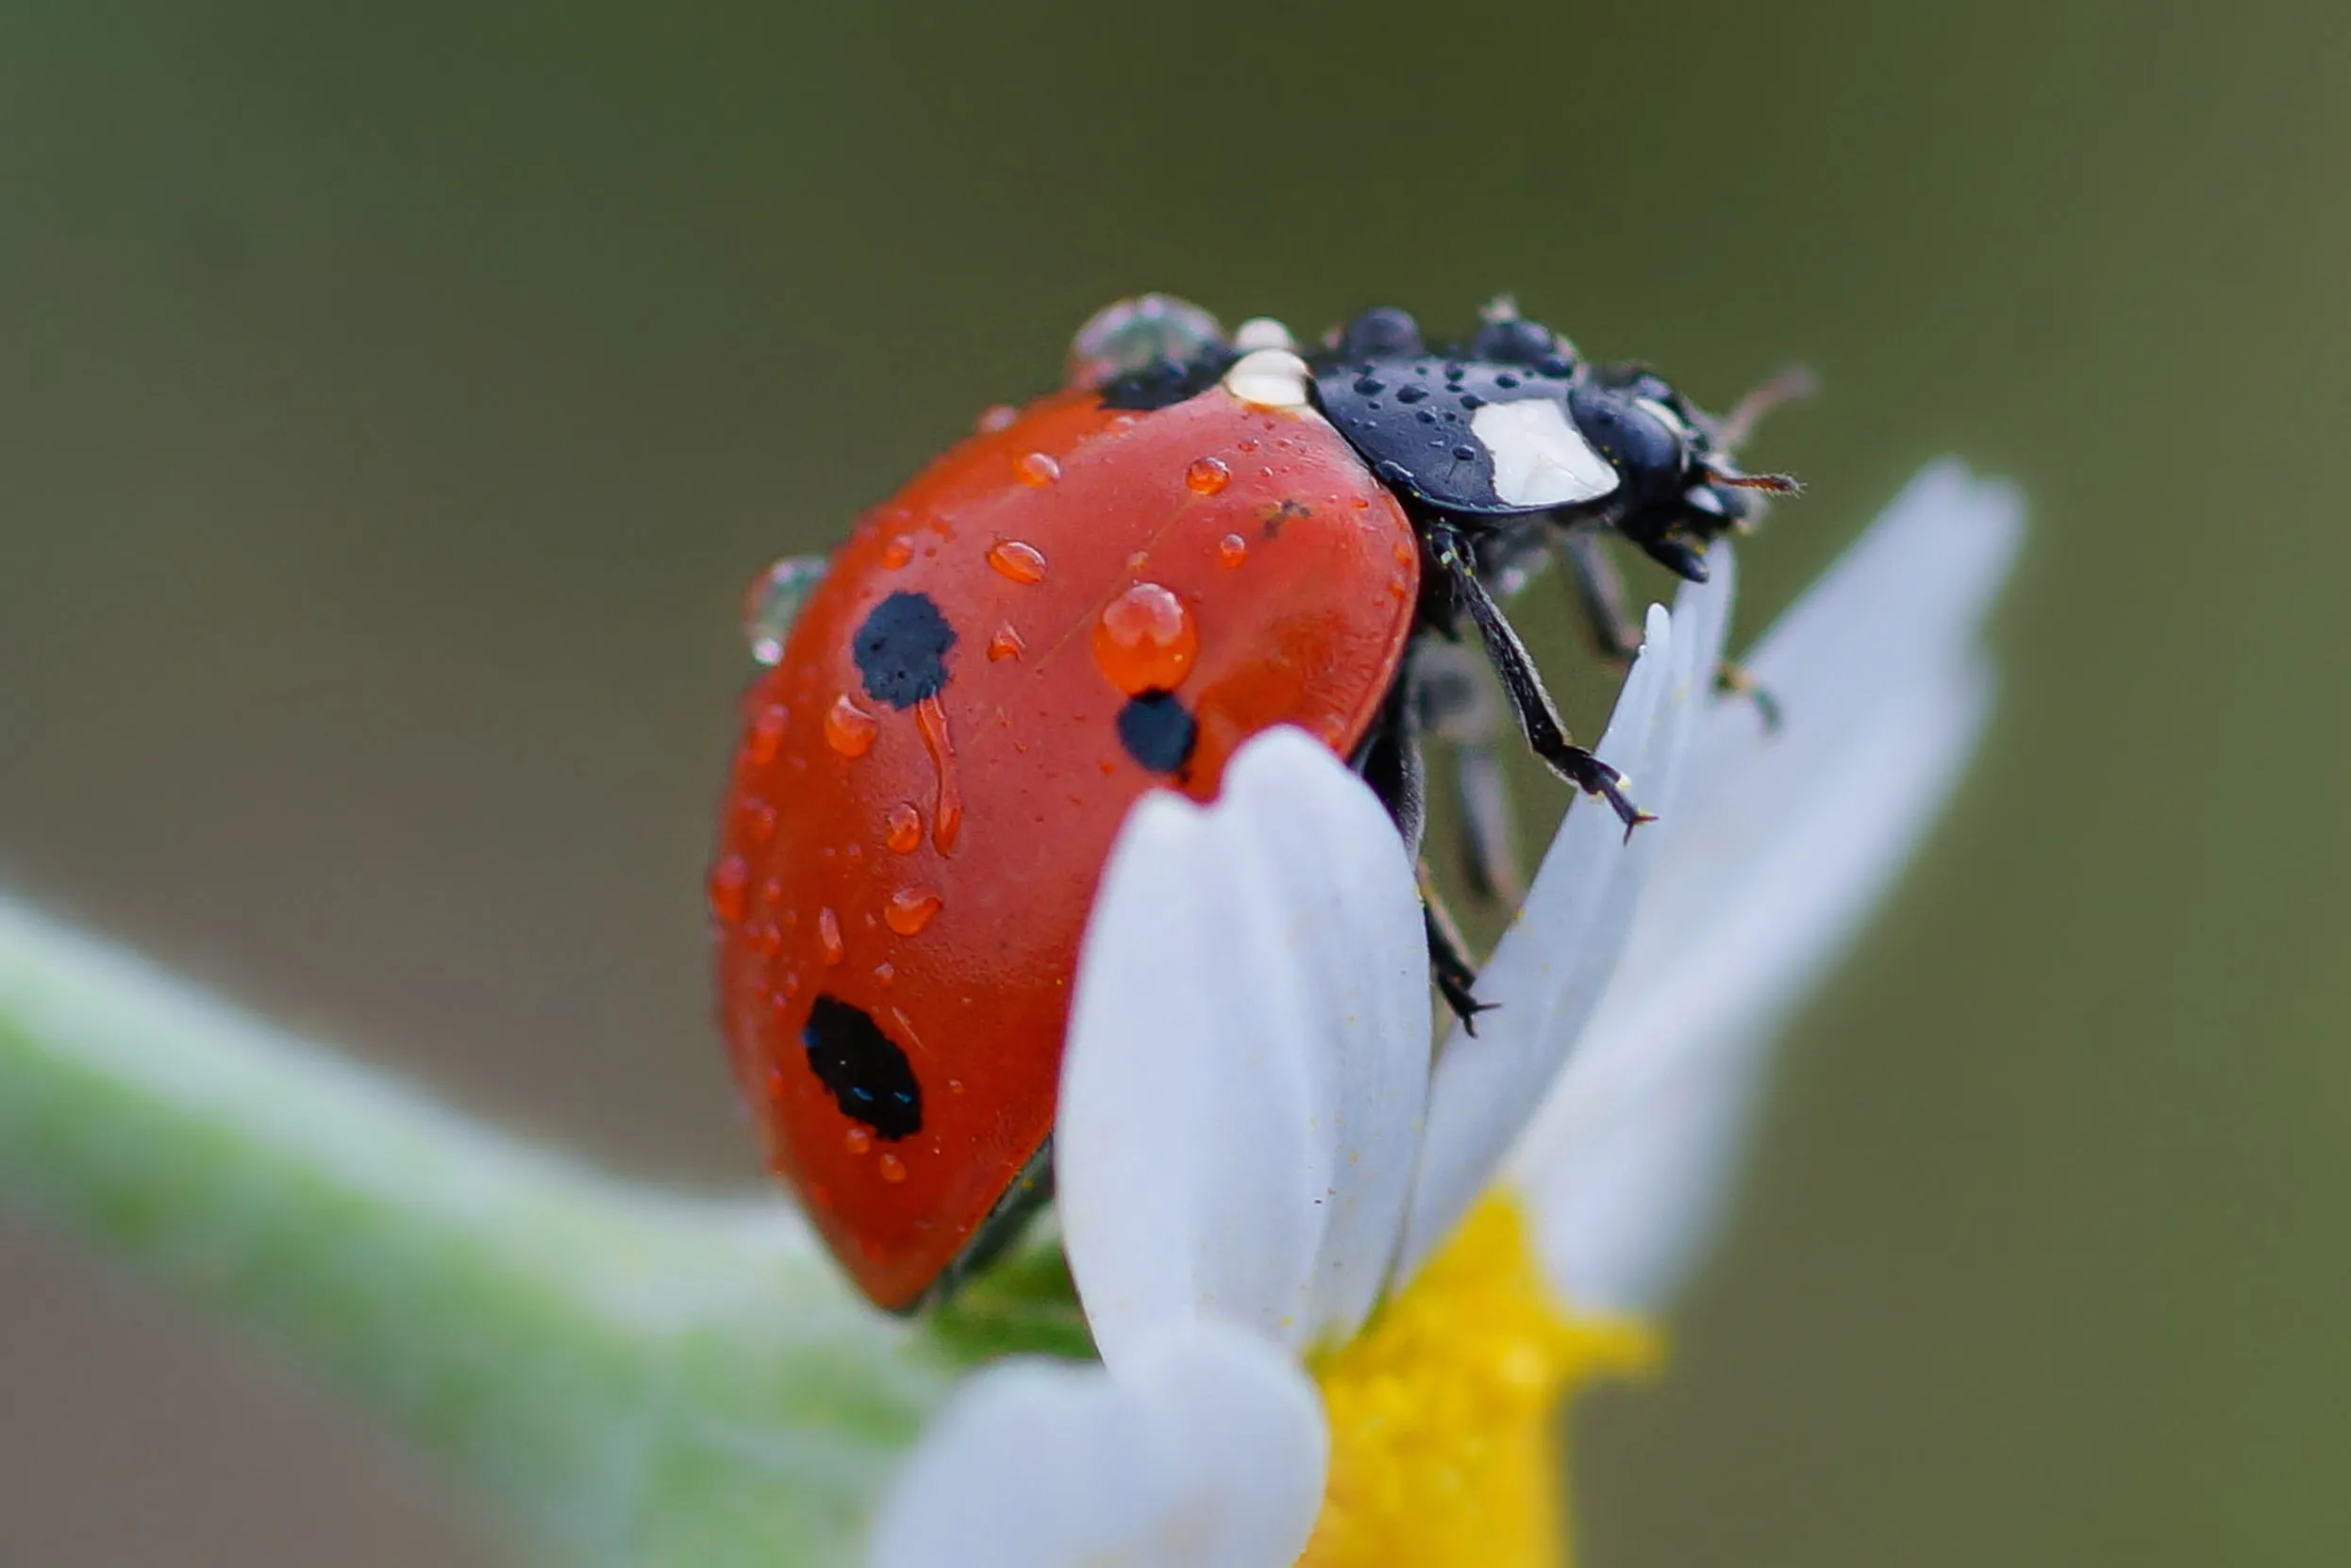 A red ladybird crawling over the white petals of a daisy.